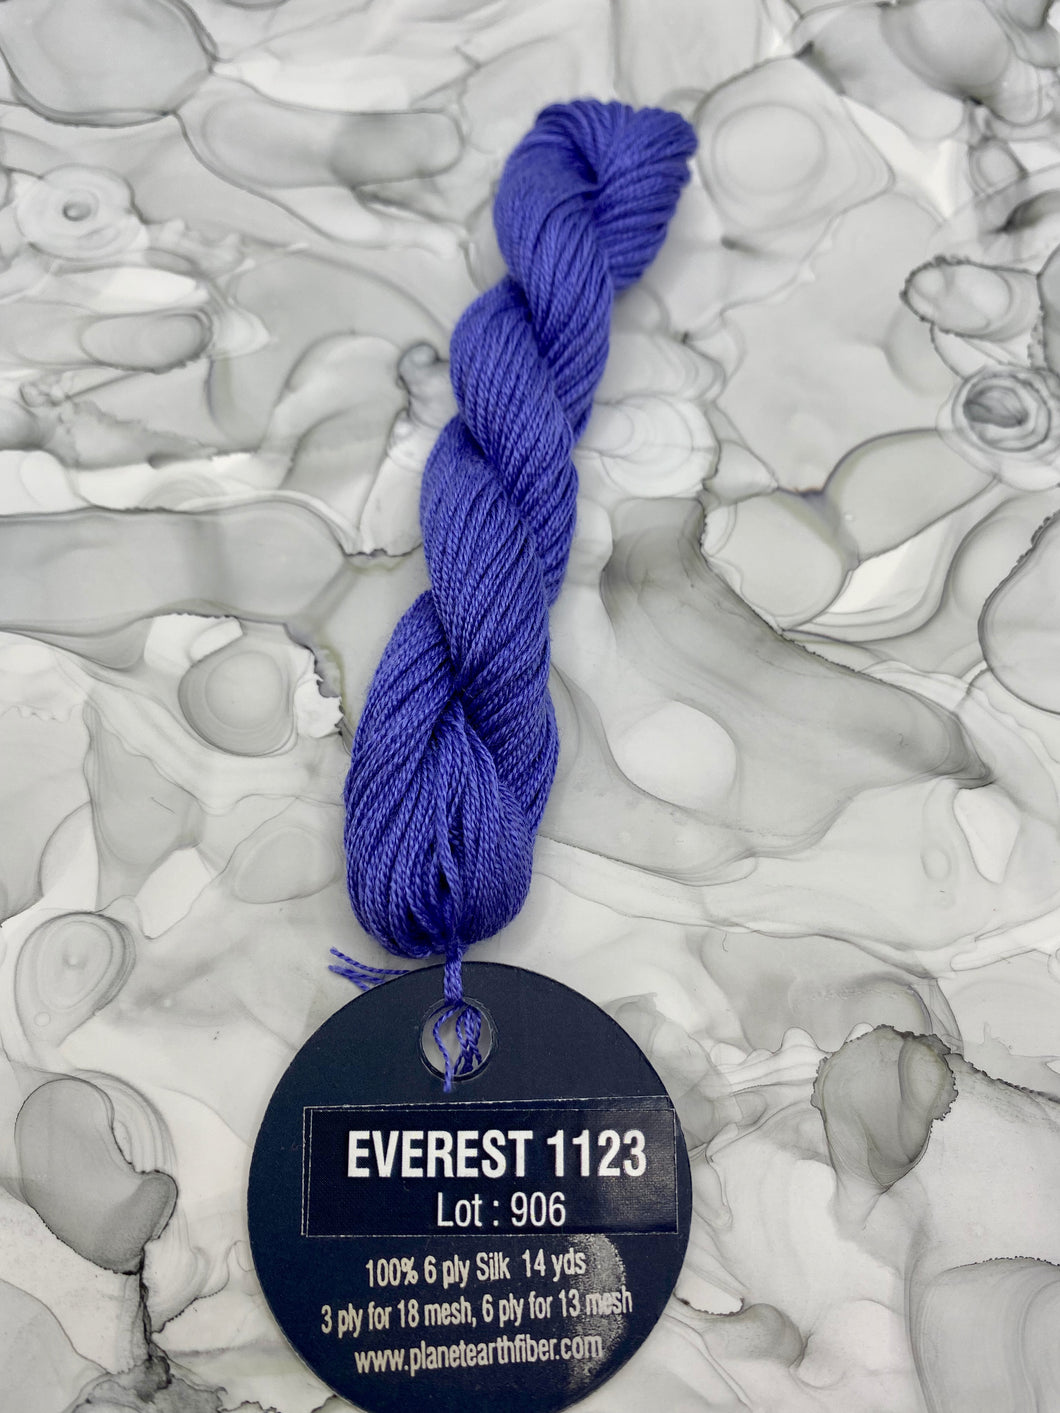 Everest (#1123) Planet Earth 6 ply silk